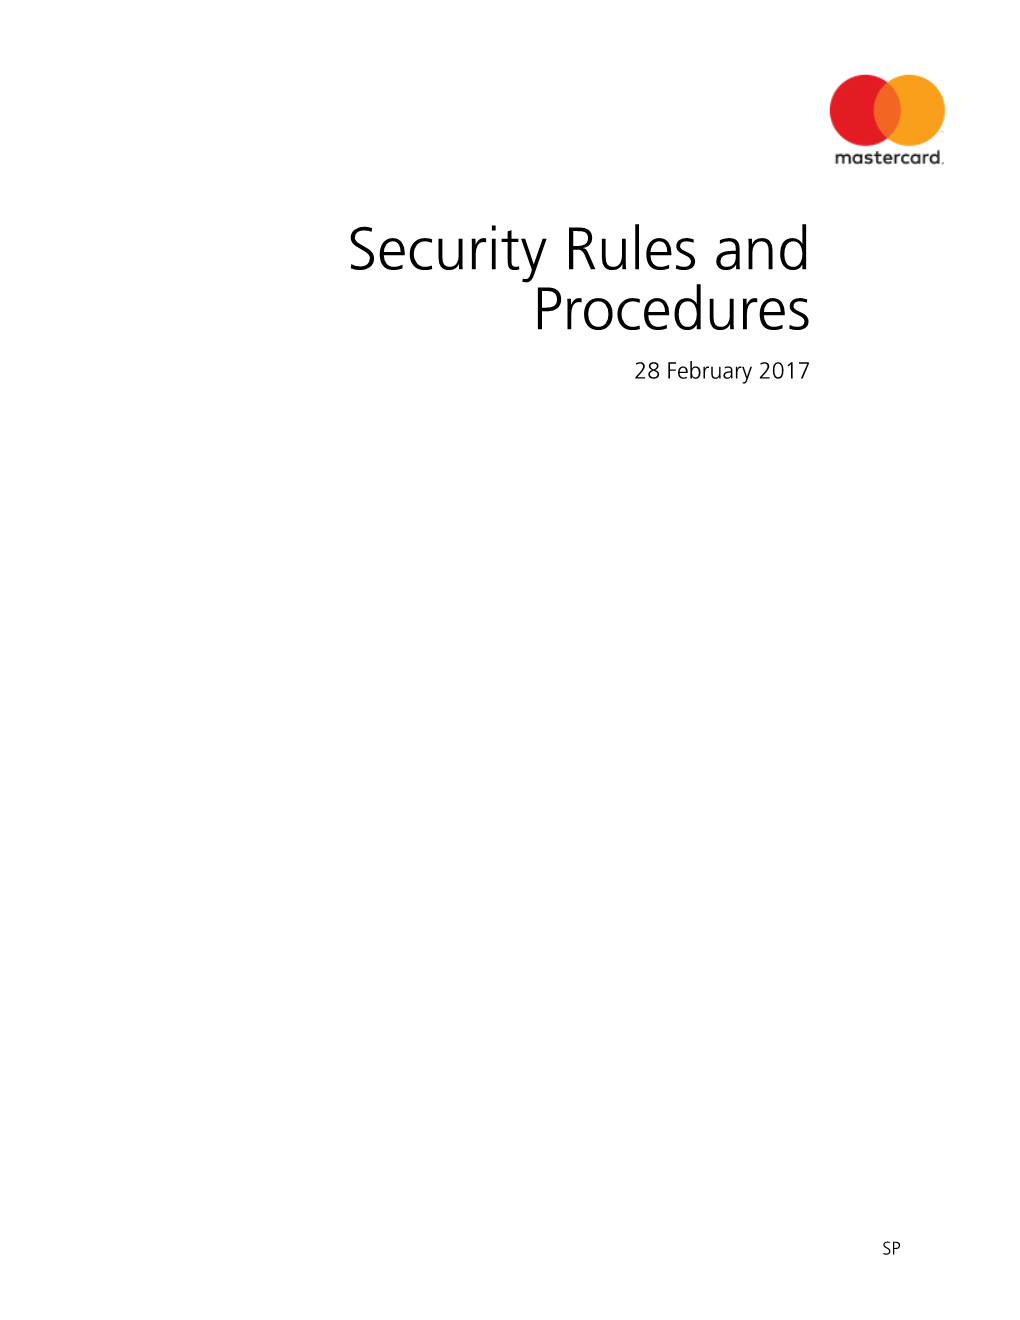 Security Rules and Procedures 28 February 2017